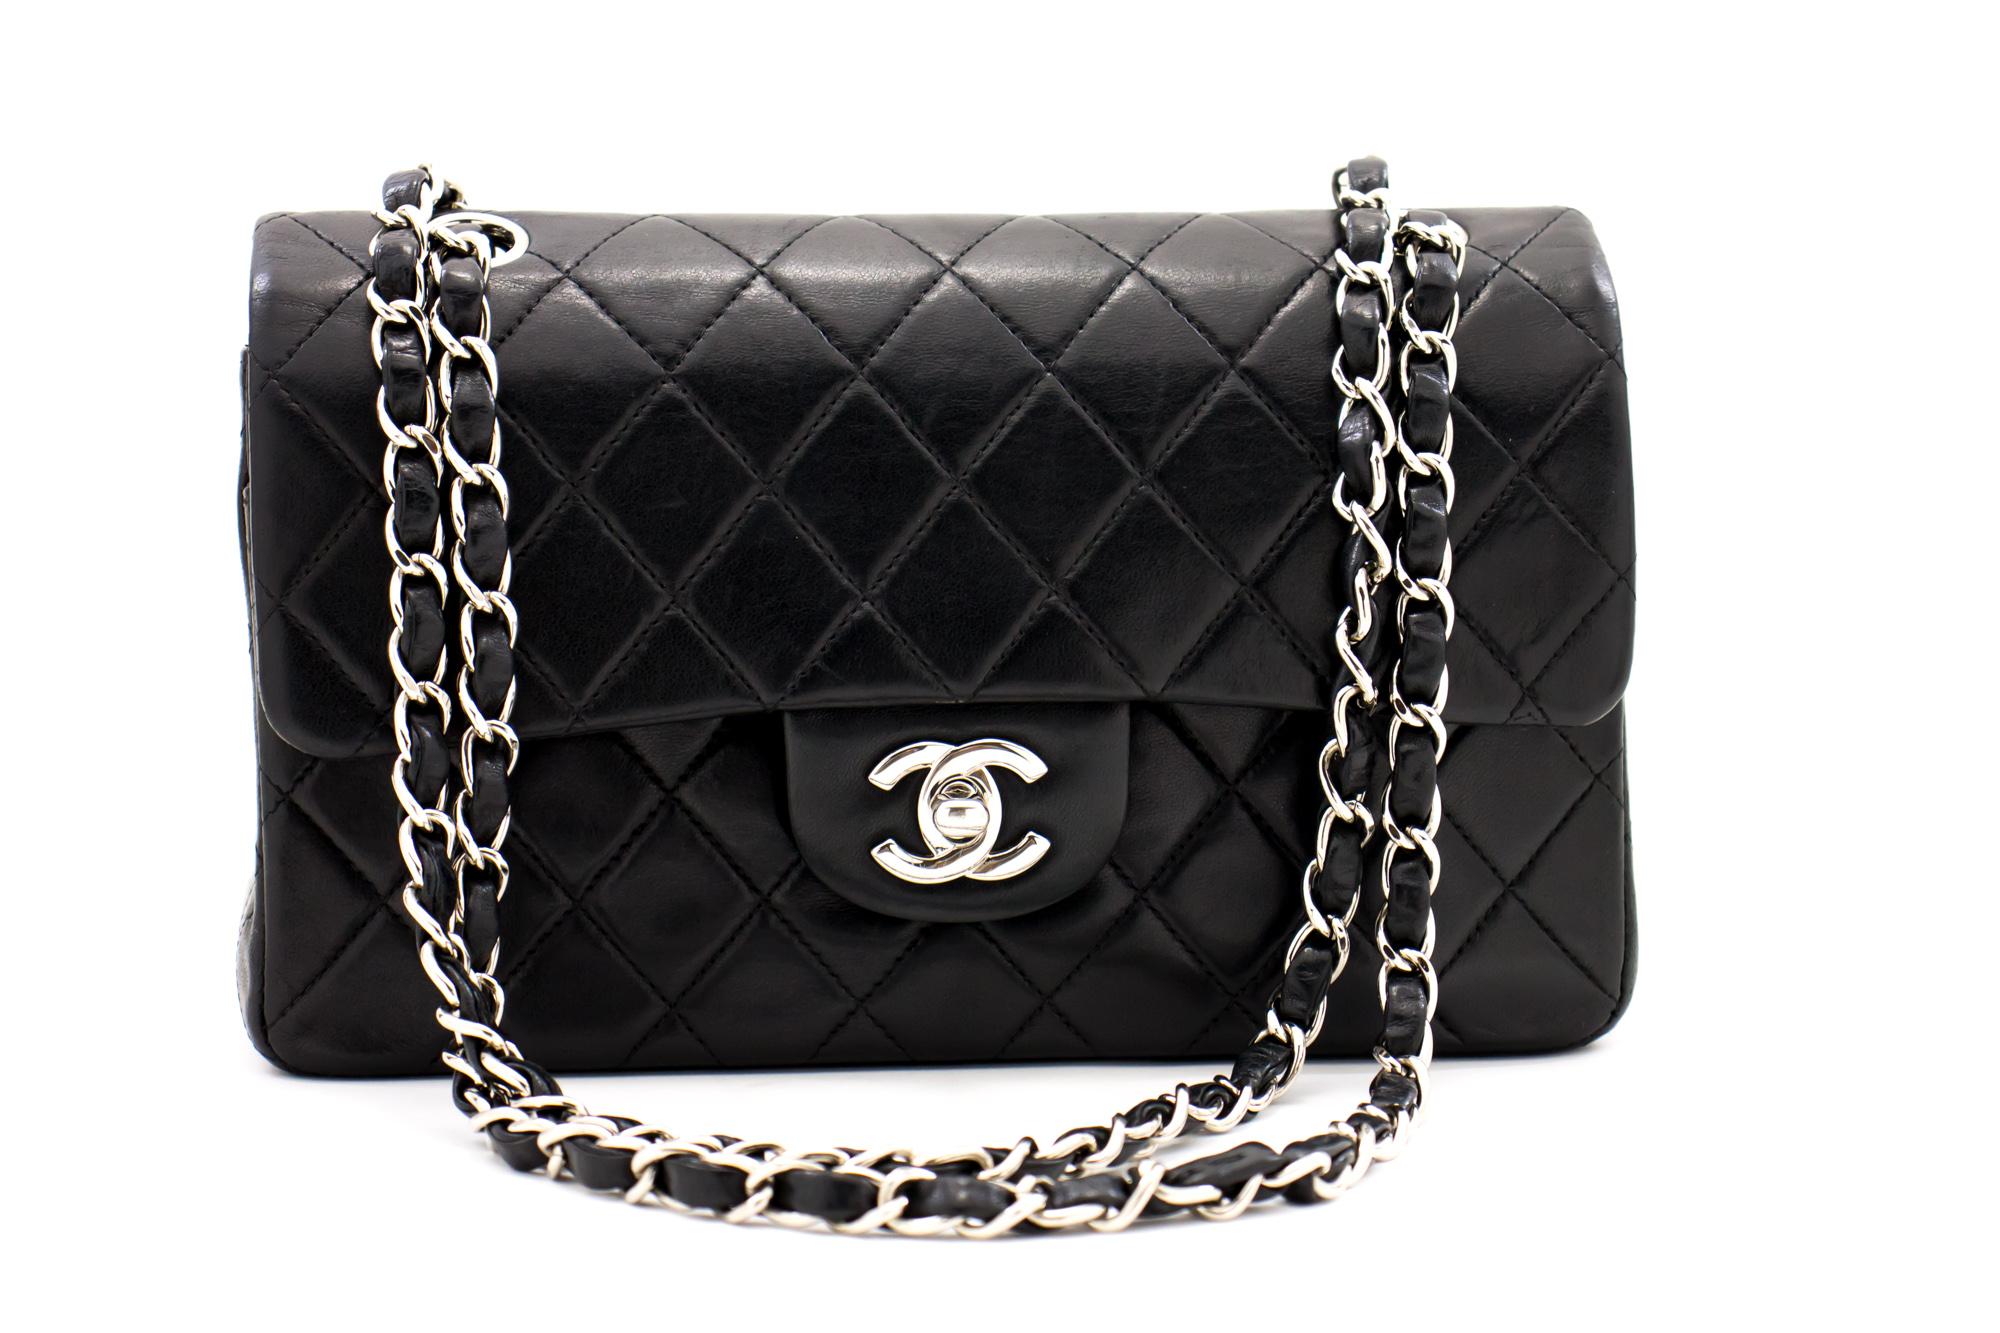 An authentic CHANEL 2.55 Classic Double Flap Small Silver Chain Shoulder Bag Black Lamb. The color is Black. The outside material is Leather. The pattern is Solid. This item is Contemporary. The year of manufacture would be 2000-2 0 0 2 .
Conditions